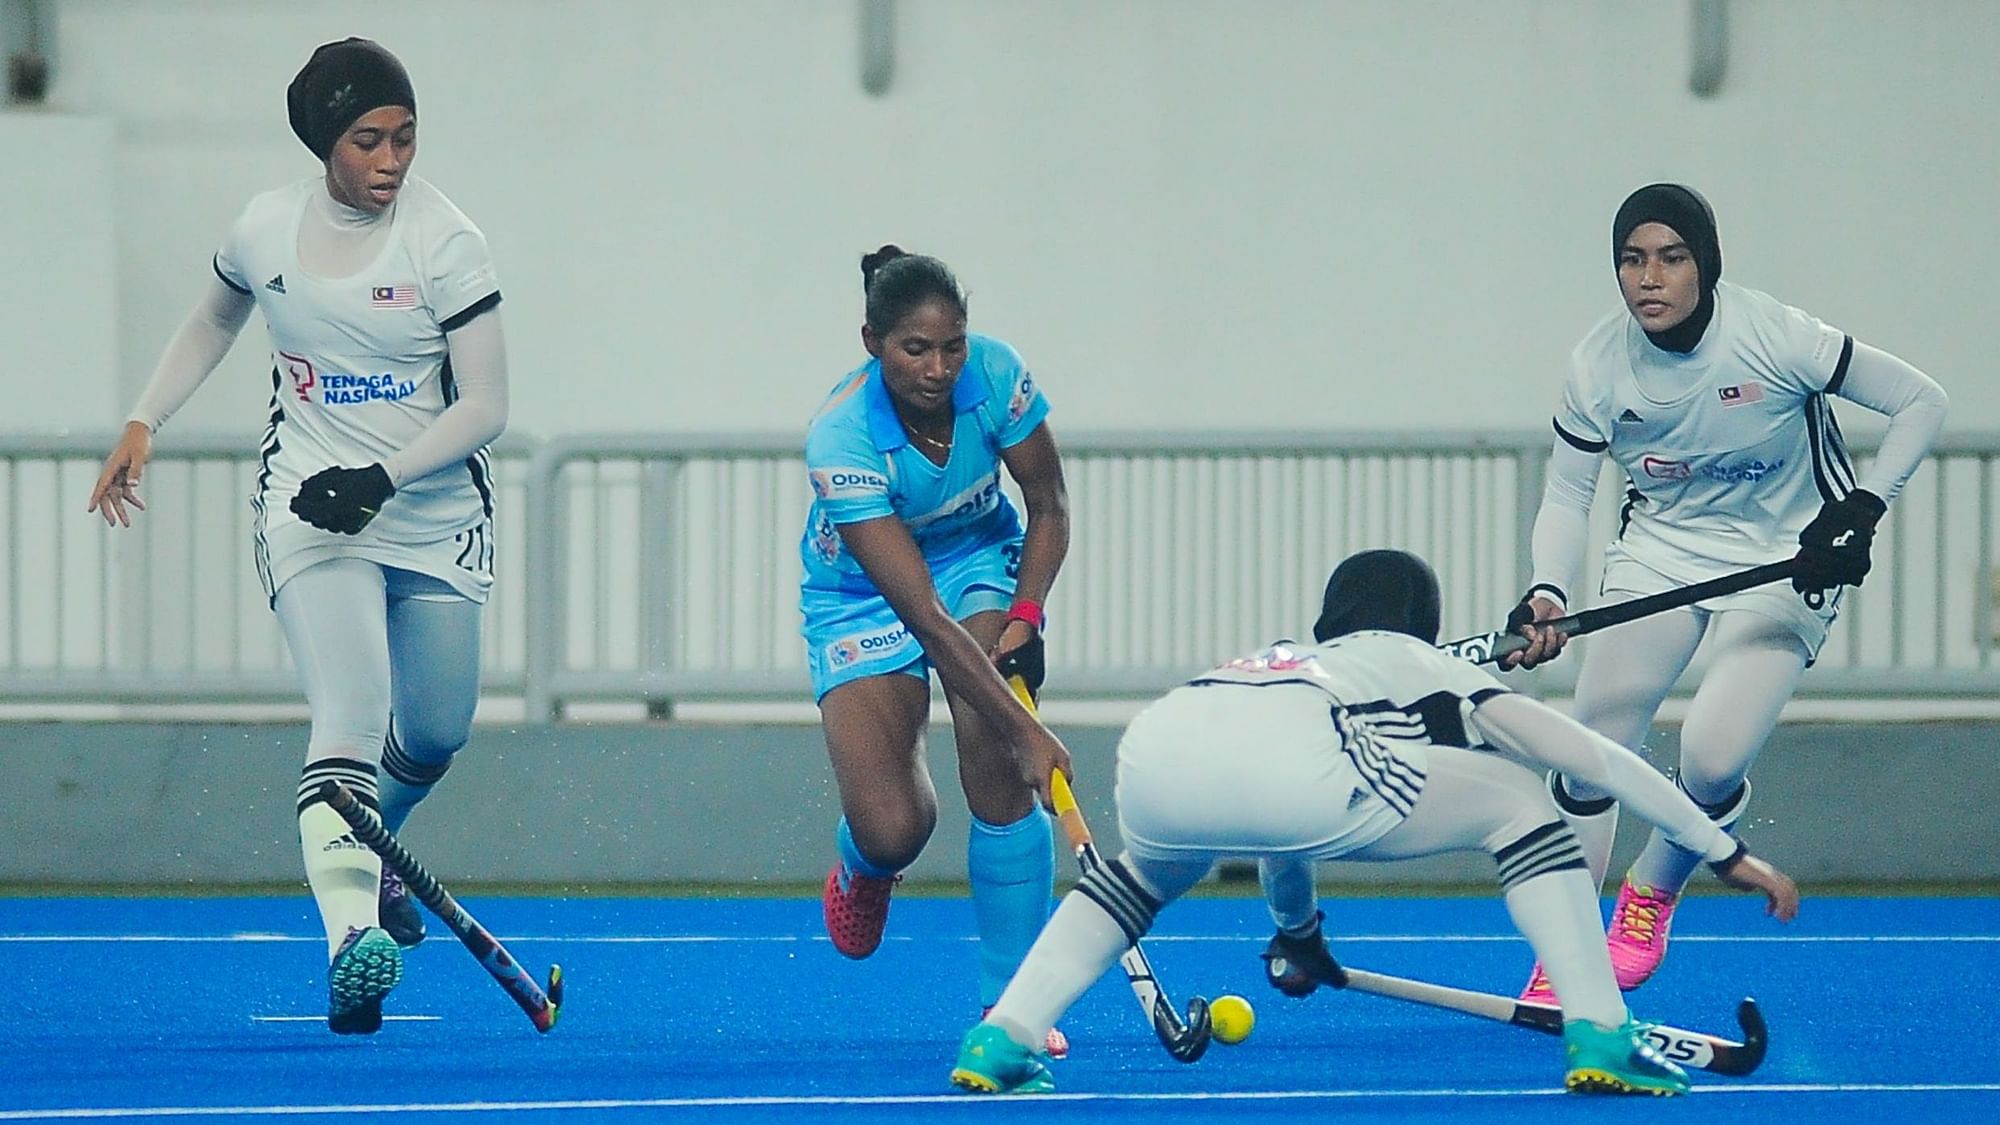 Indian women’s hockey team overcame a 2-4 setback in the third quarter to level the scores 4-4 in their third match against Malaysia.